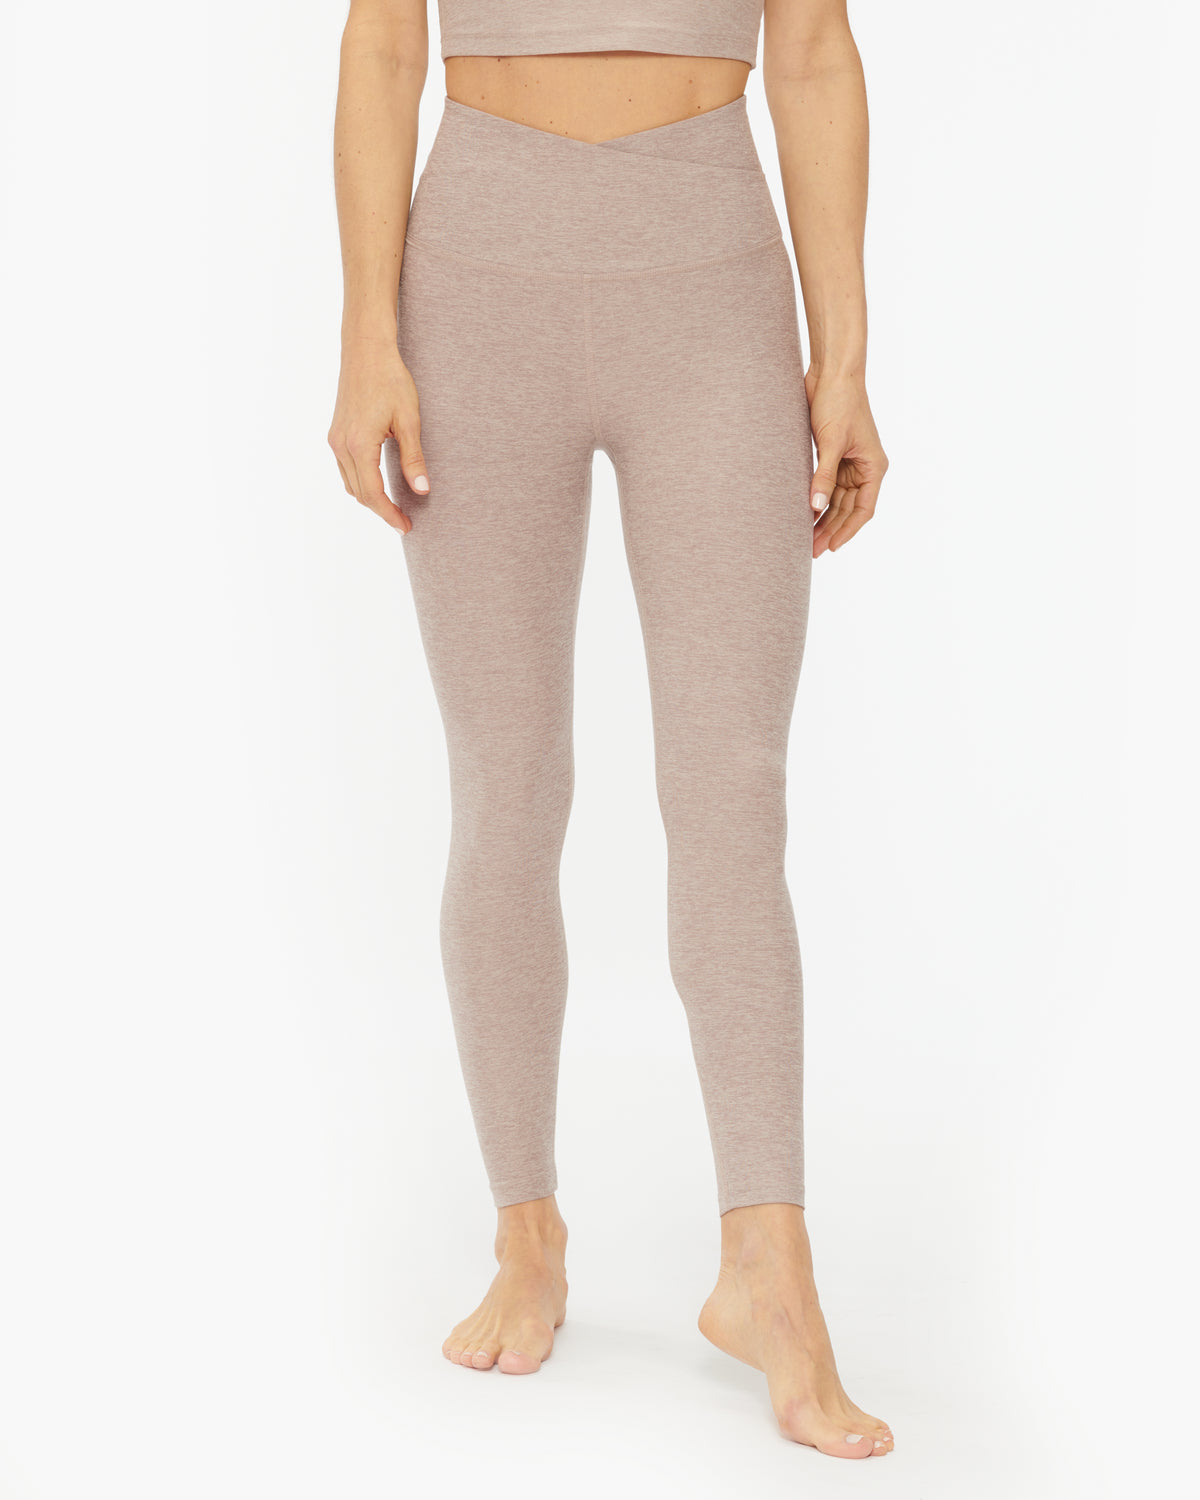 District Vision Women's Recycled Pocketed Legging – The Shop at Equinox